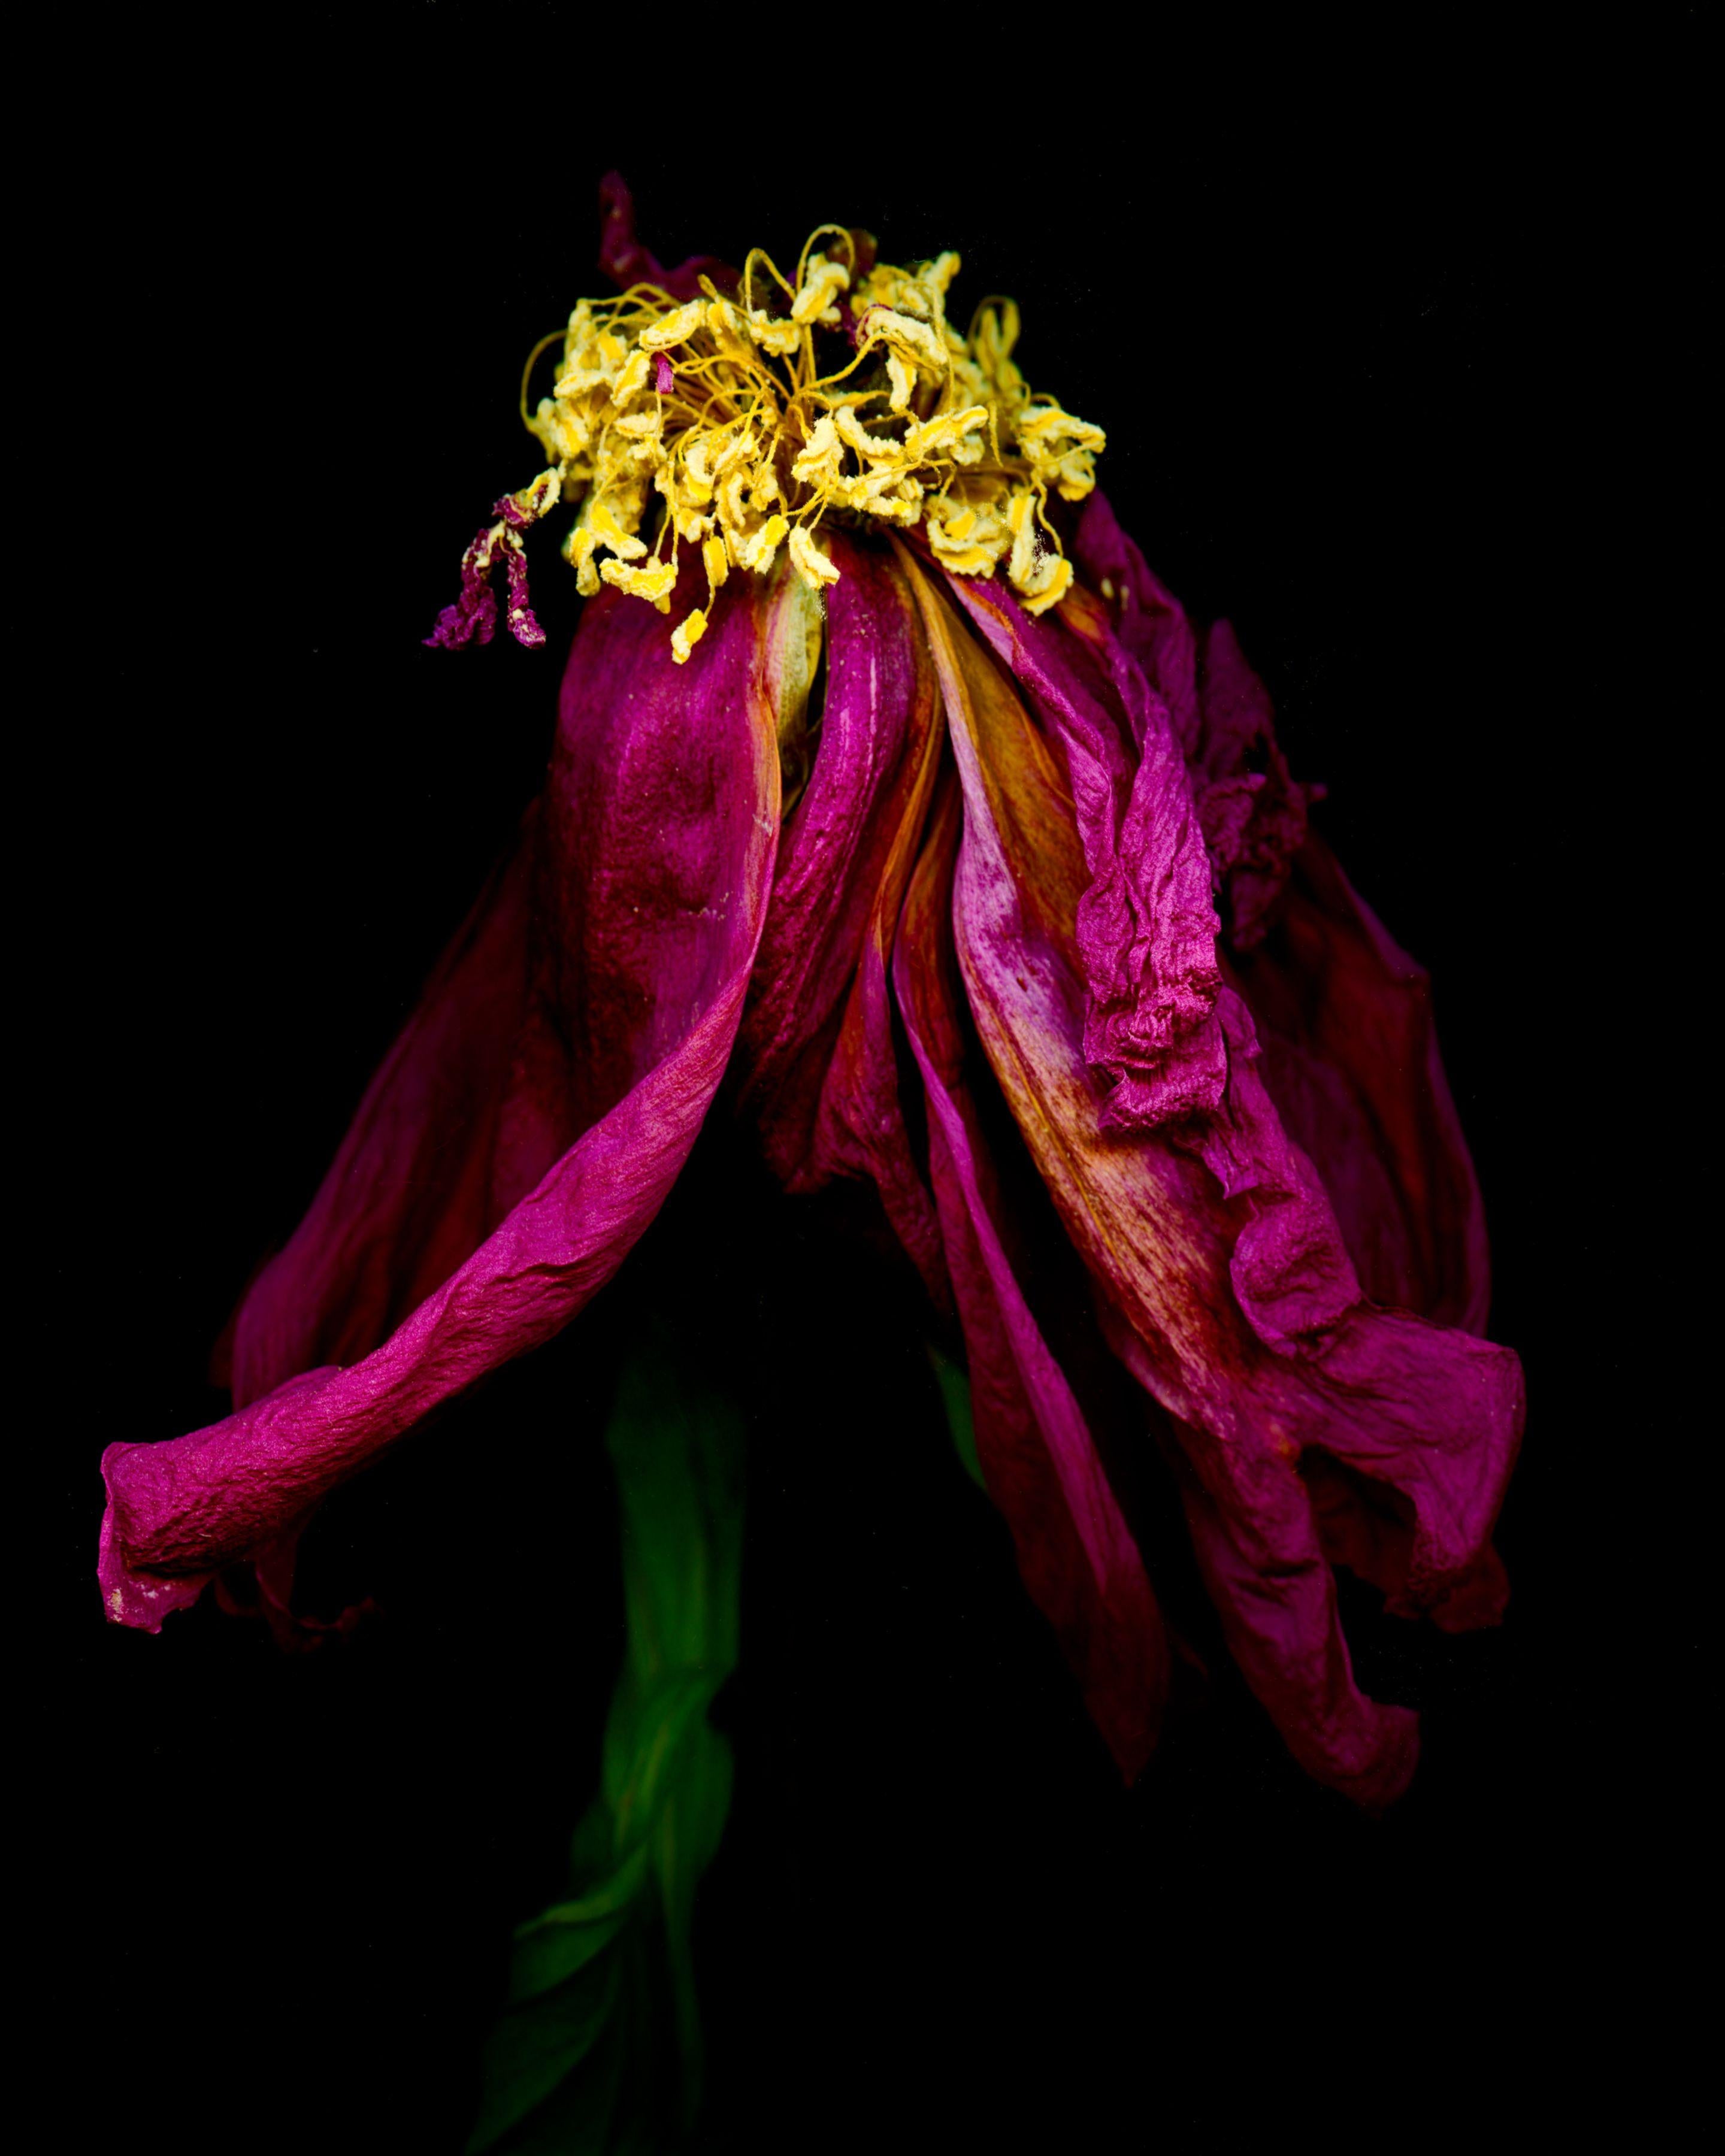 David McCrae Color Photograph - Alm Hill Farm Dried Peony #4, Photograph, Archival Ink Jet